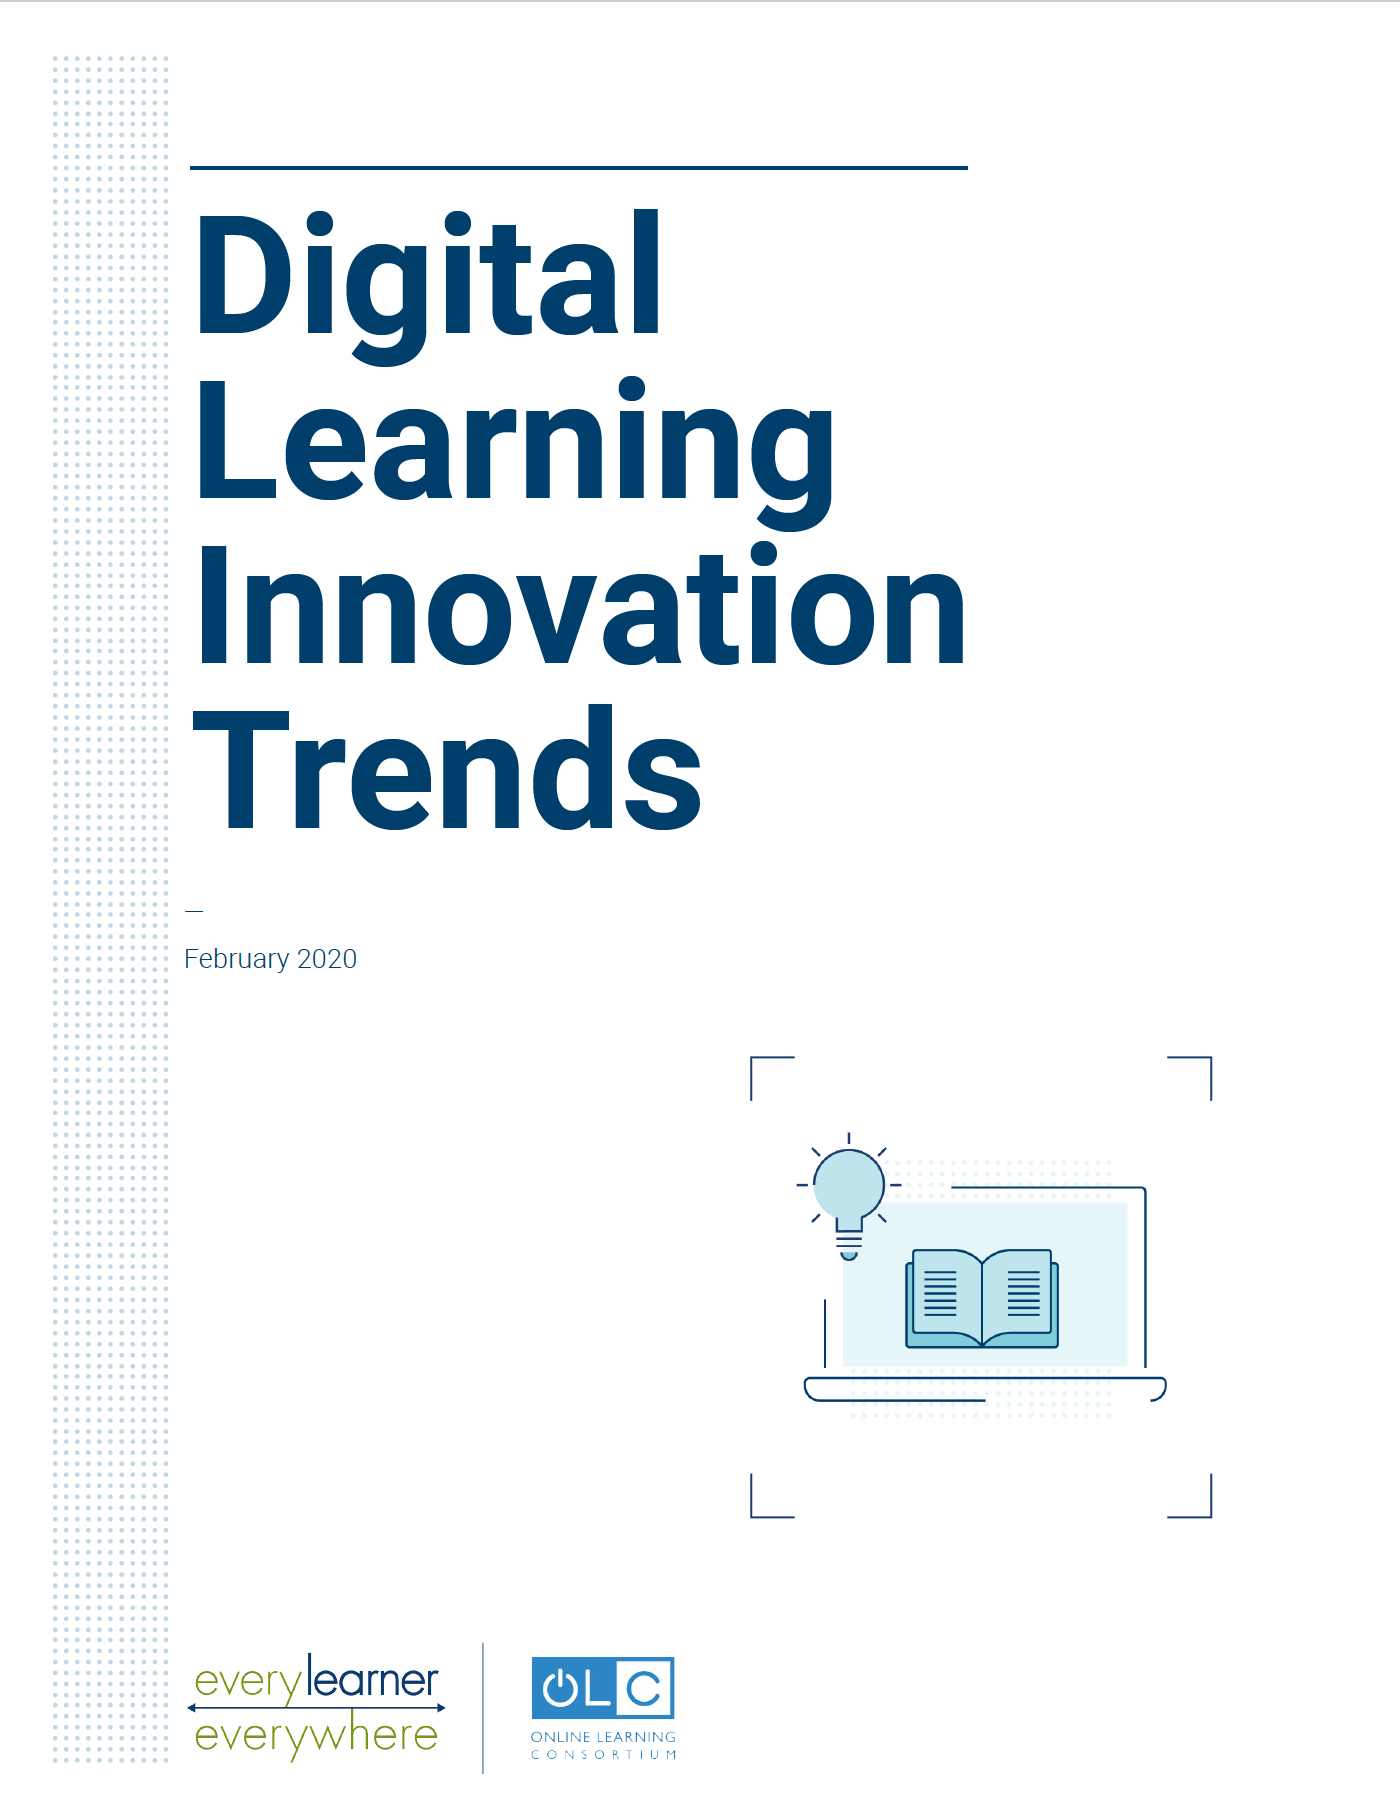 Digital-Learning-Innovation-Trends Cover Image